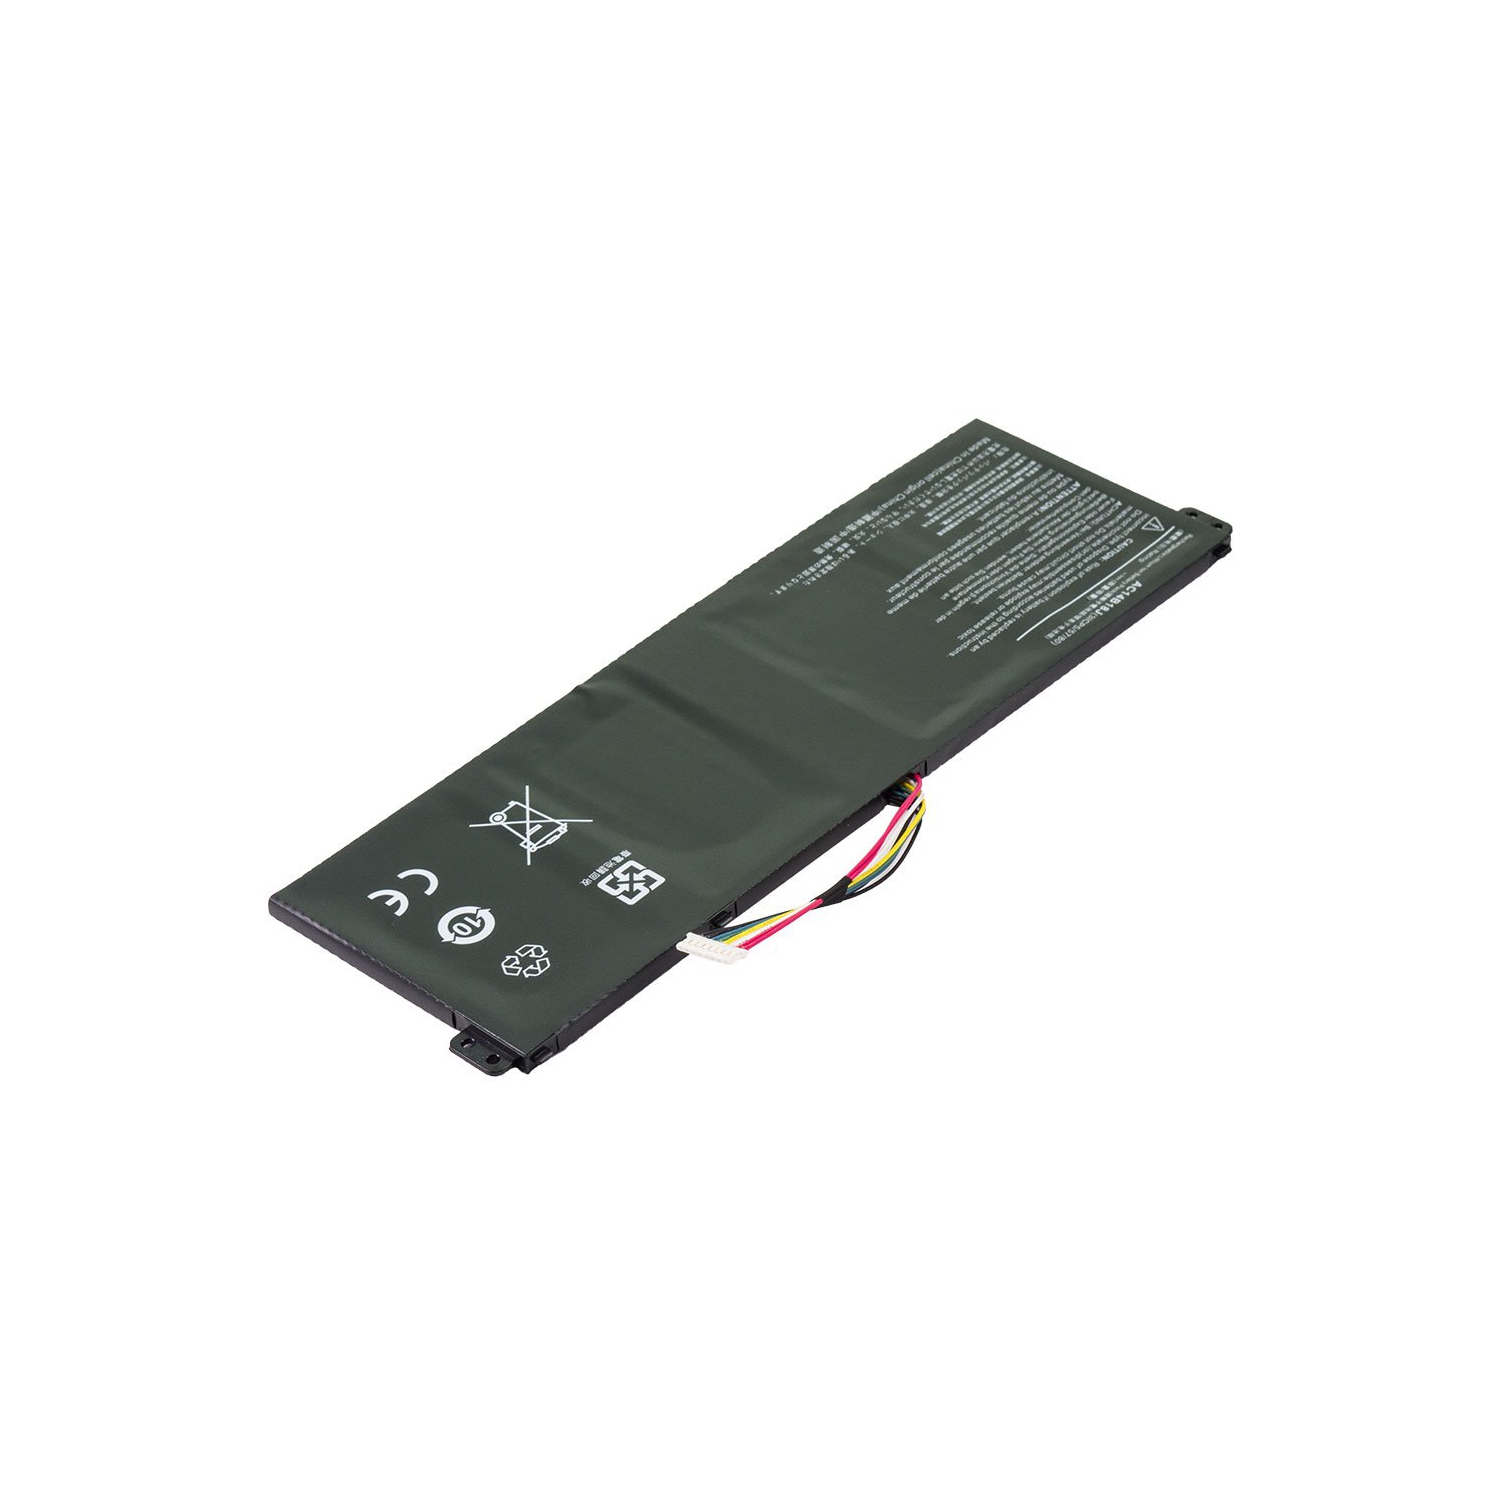 Laptop Battery Replacement for Acer Aspire ES1-521-880K, 3ICP5/57/80, AC14B13J, AC14B18J